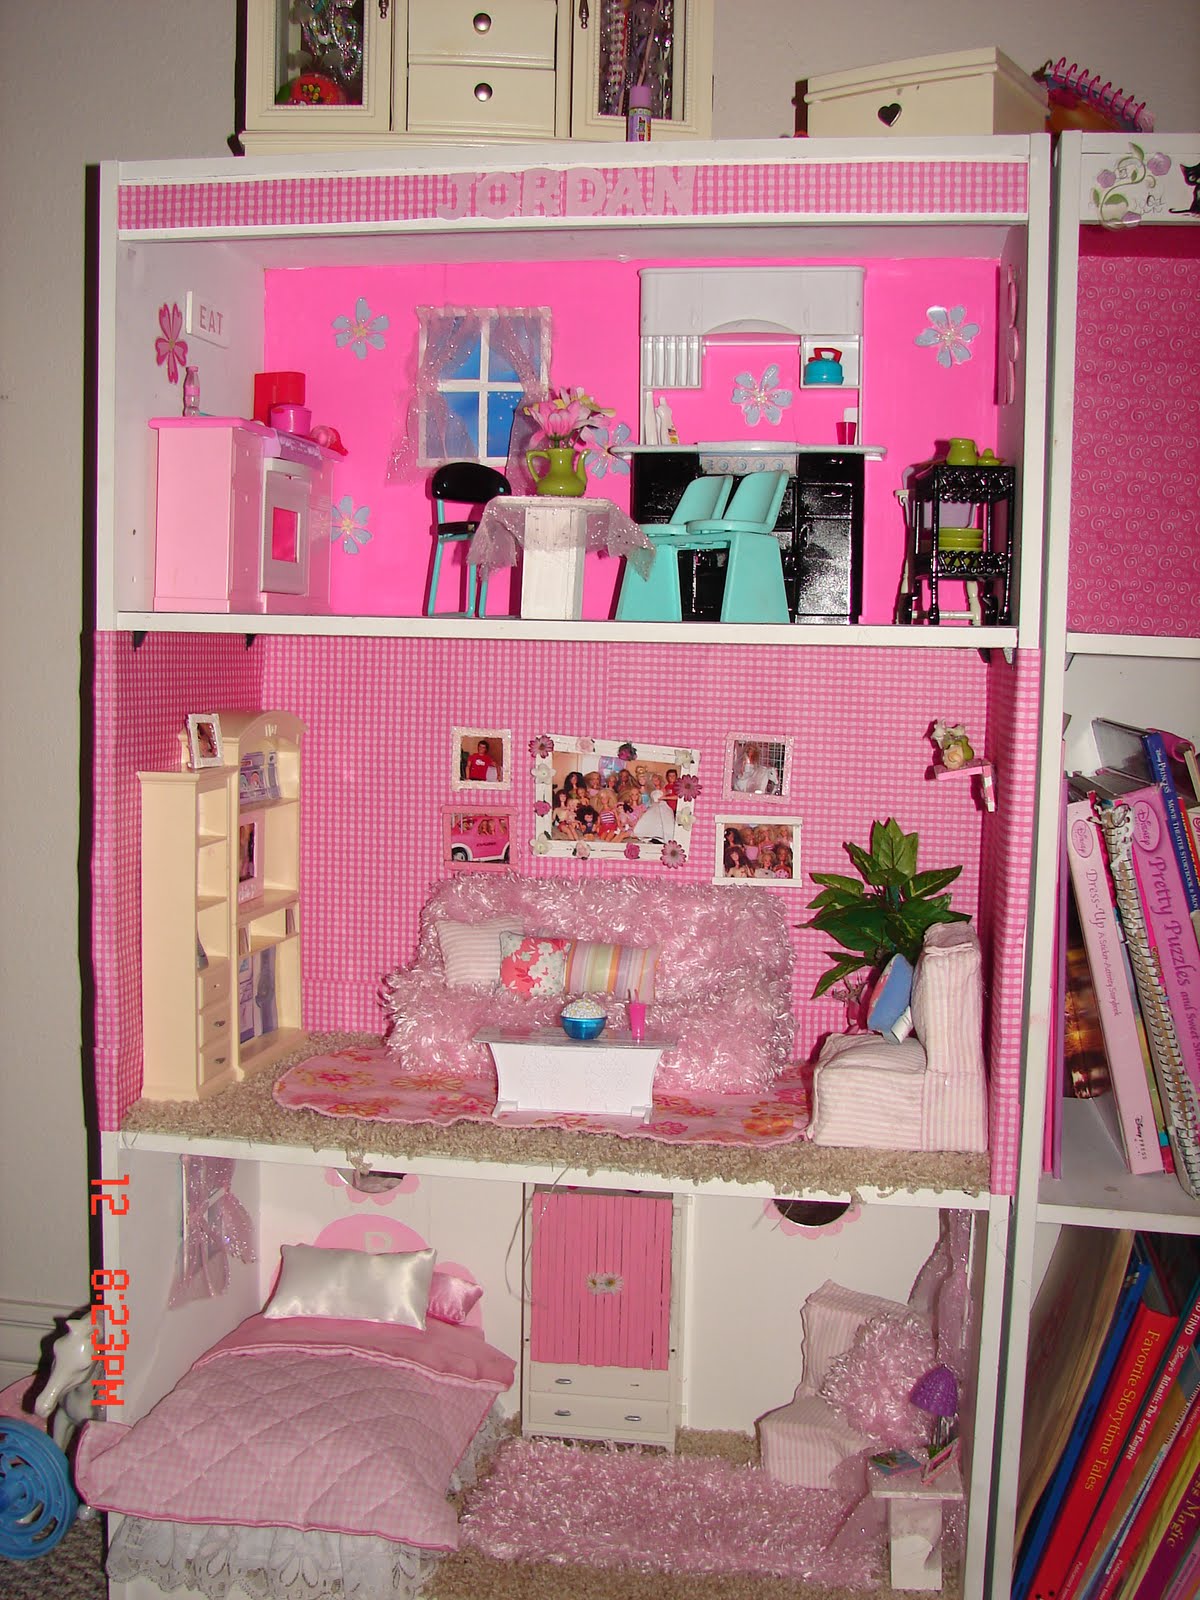 Regifter's Bible: Searching for Barbie's budget Dream House